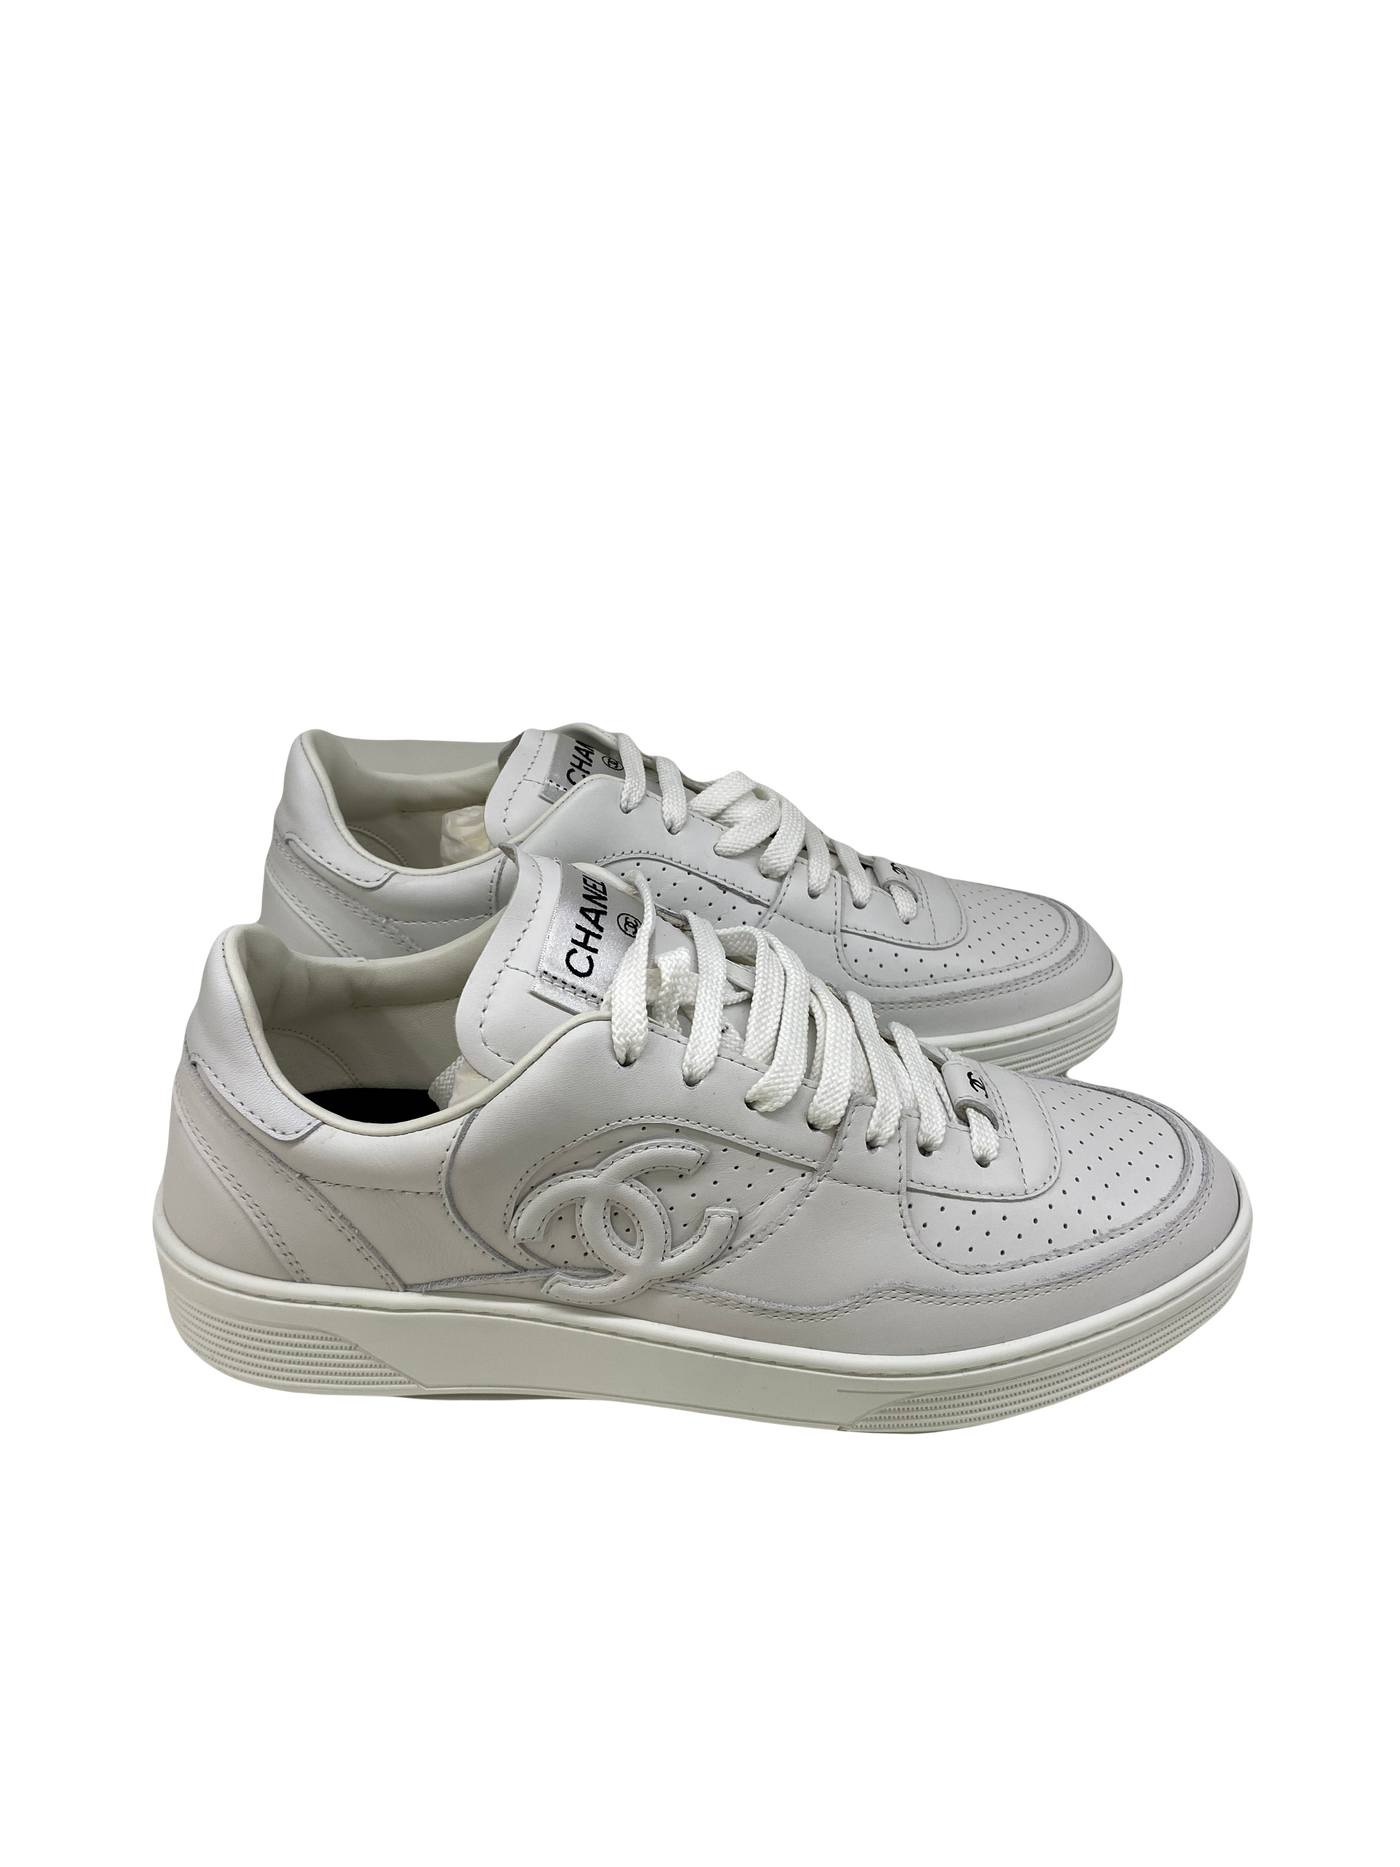 Chanel White Sneakers - Size 40